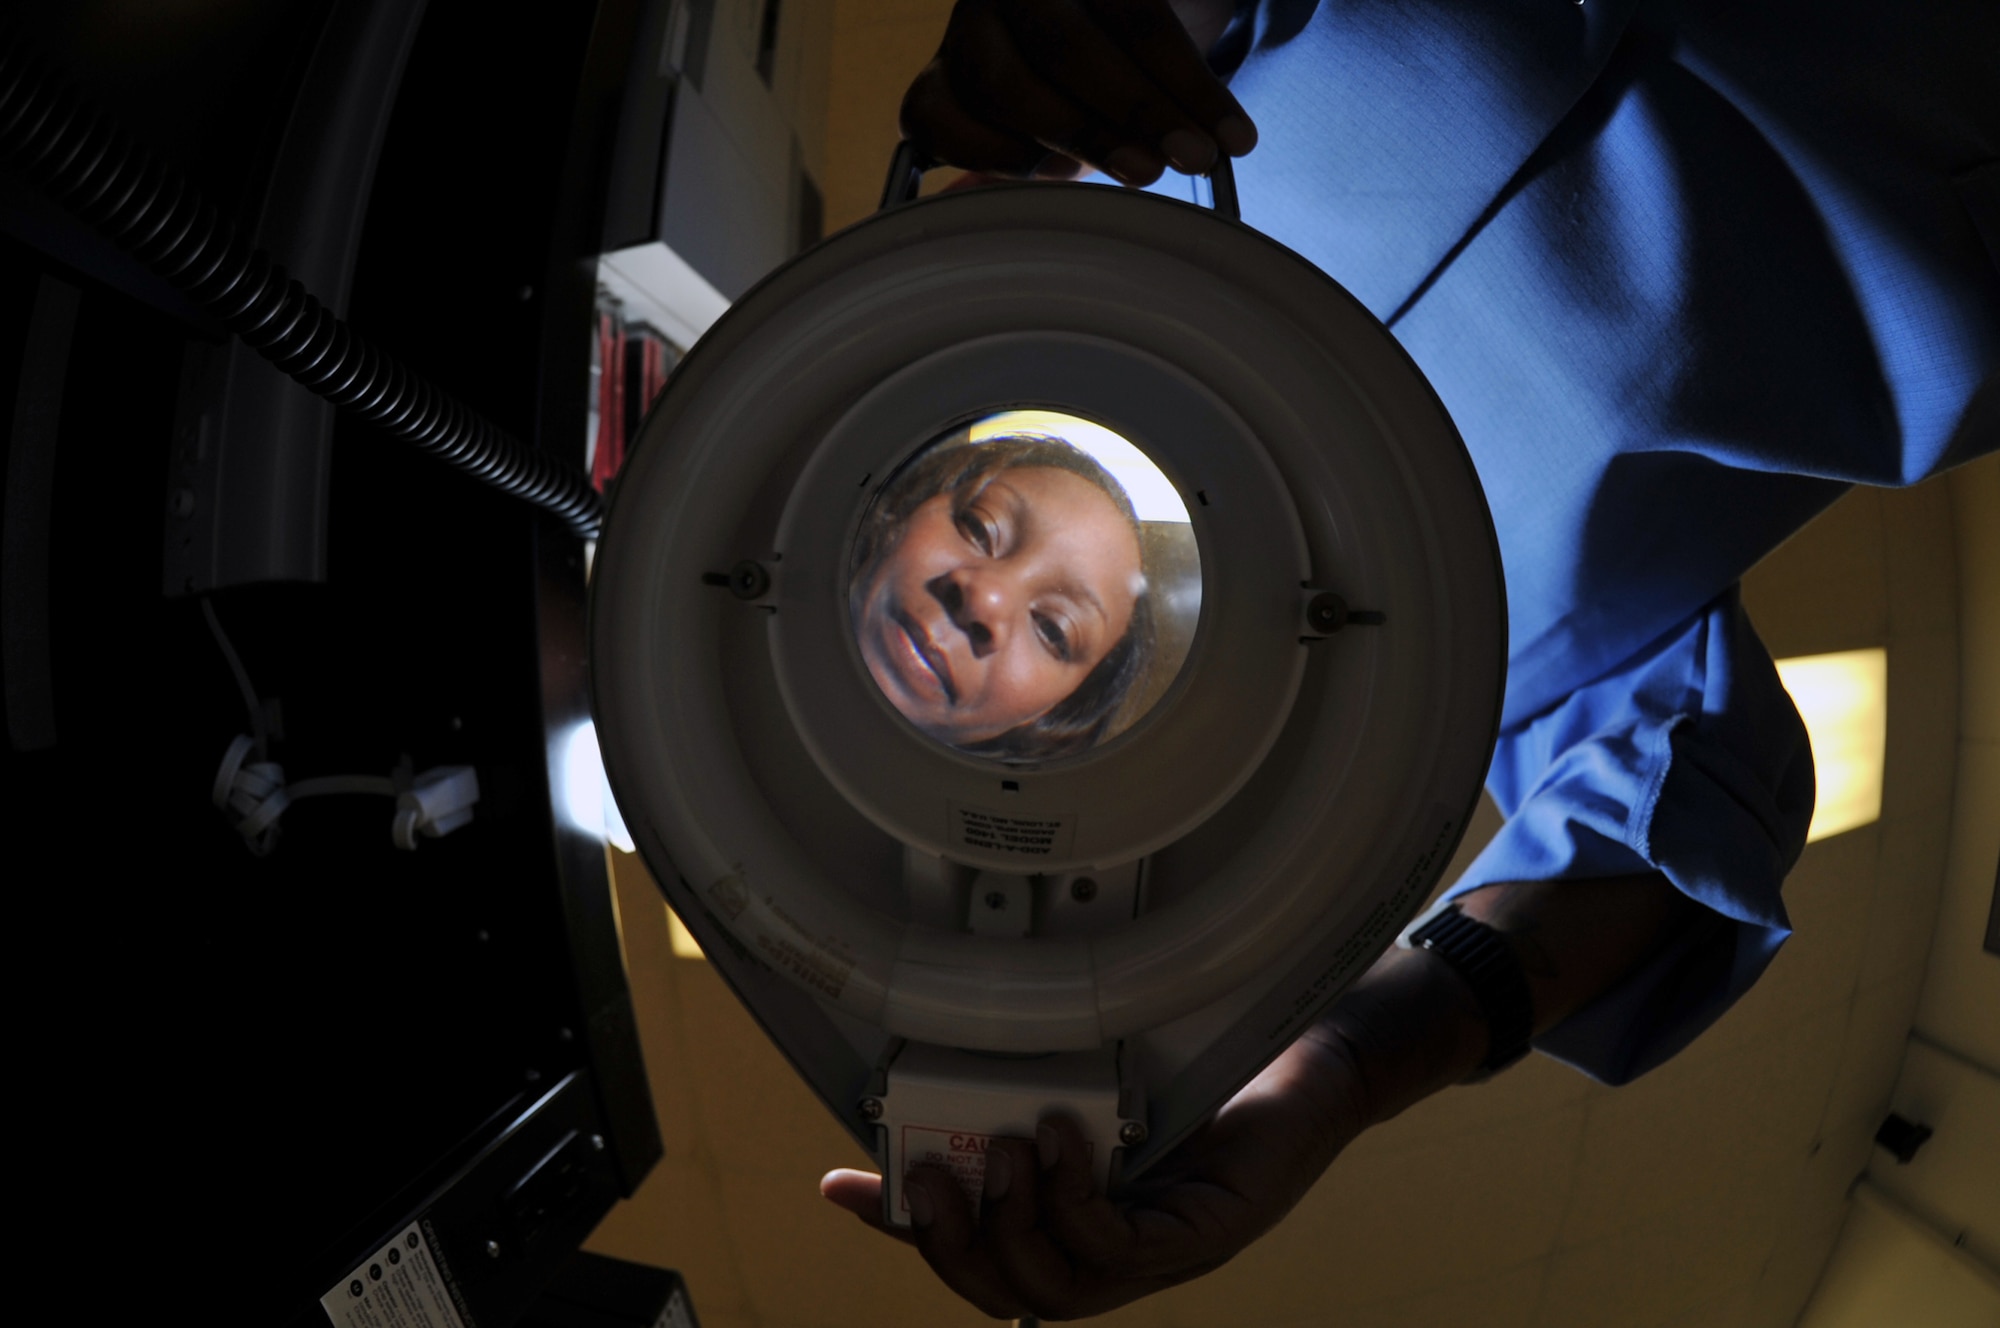 WHITEMAN AIR FORCE BASE, Mo. - Staff Sgt. Donnecha Blackmon, 509th Maintenance Group, Air Force Repair Enhancement Program lead circuit card repair technician, looks through a magnifying glass used repair circuit cards, July 21. Sergeant Stewart recently repaired an interface card and saved the Air Force $370,000 allowing uninterrupted avionics interface testing. (U.S. Air Force photo/Tech. Sgt. Charles D. Larkin Sr.)  (Released).                                            